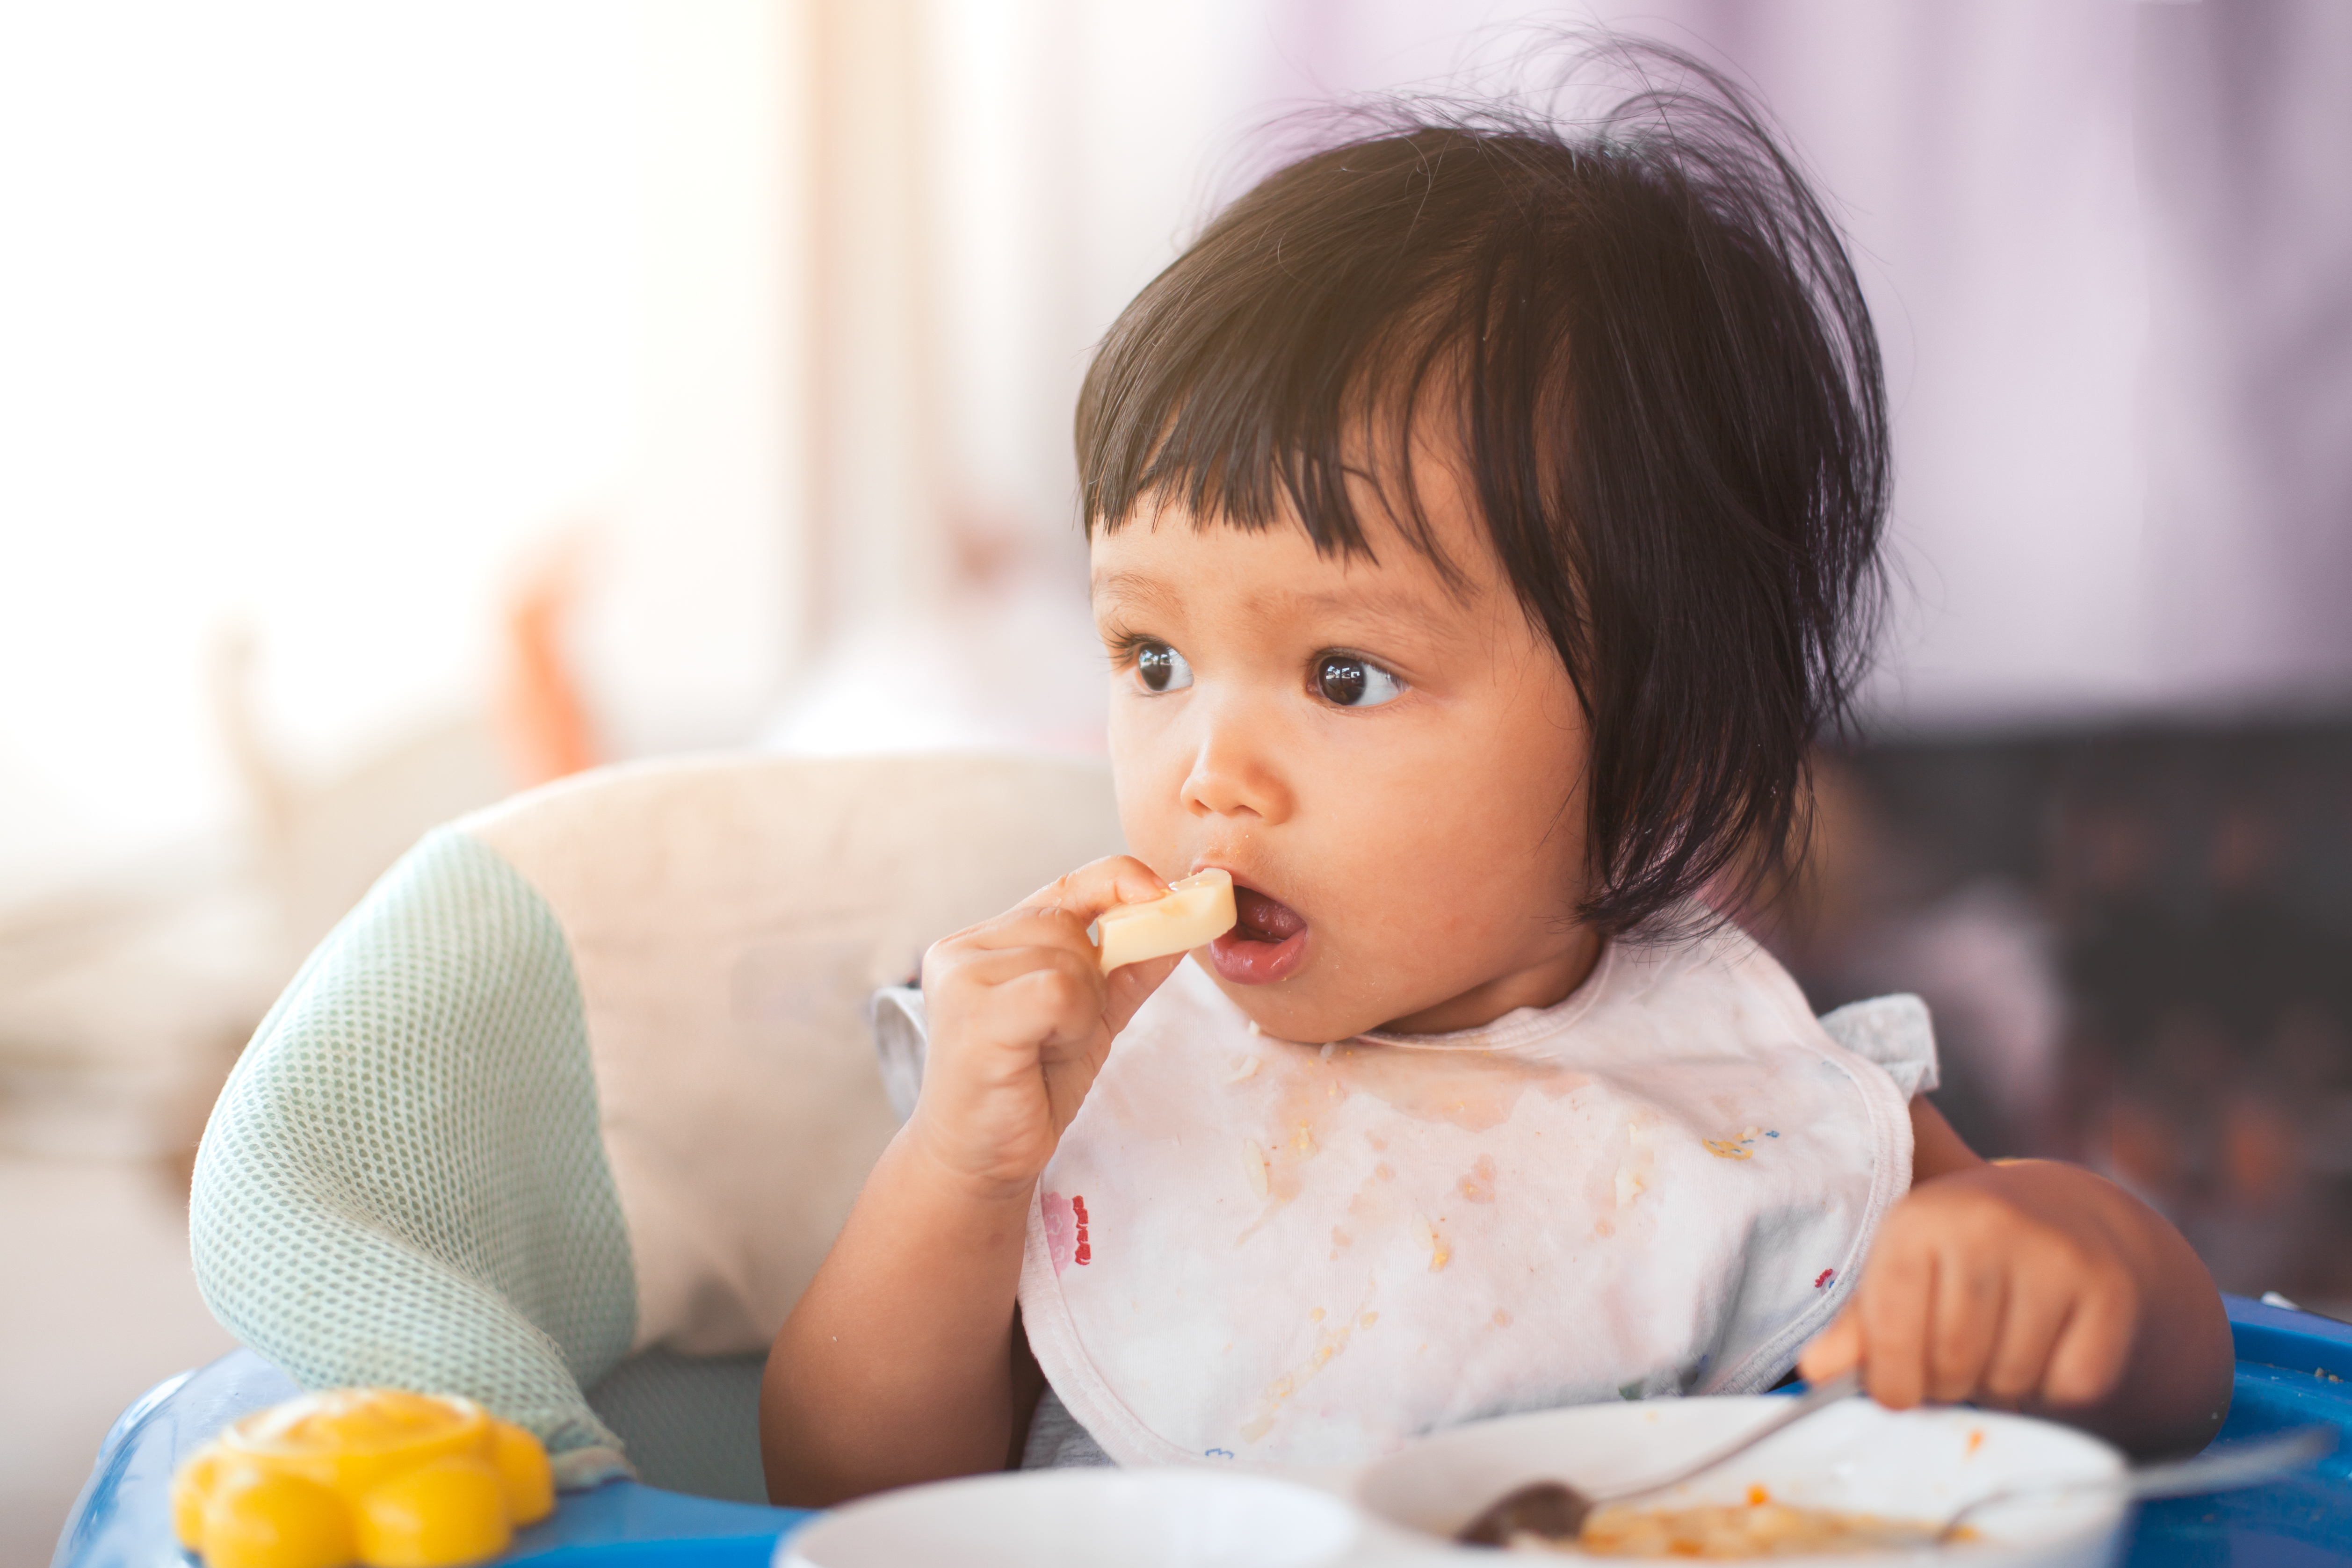 Cute baby asian child girl eating healthy food by herself and making a mess on her face and hand